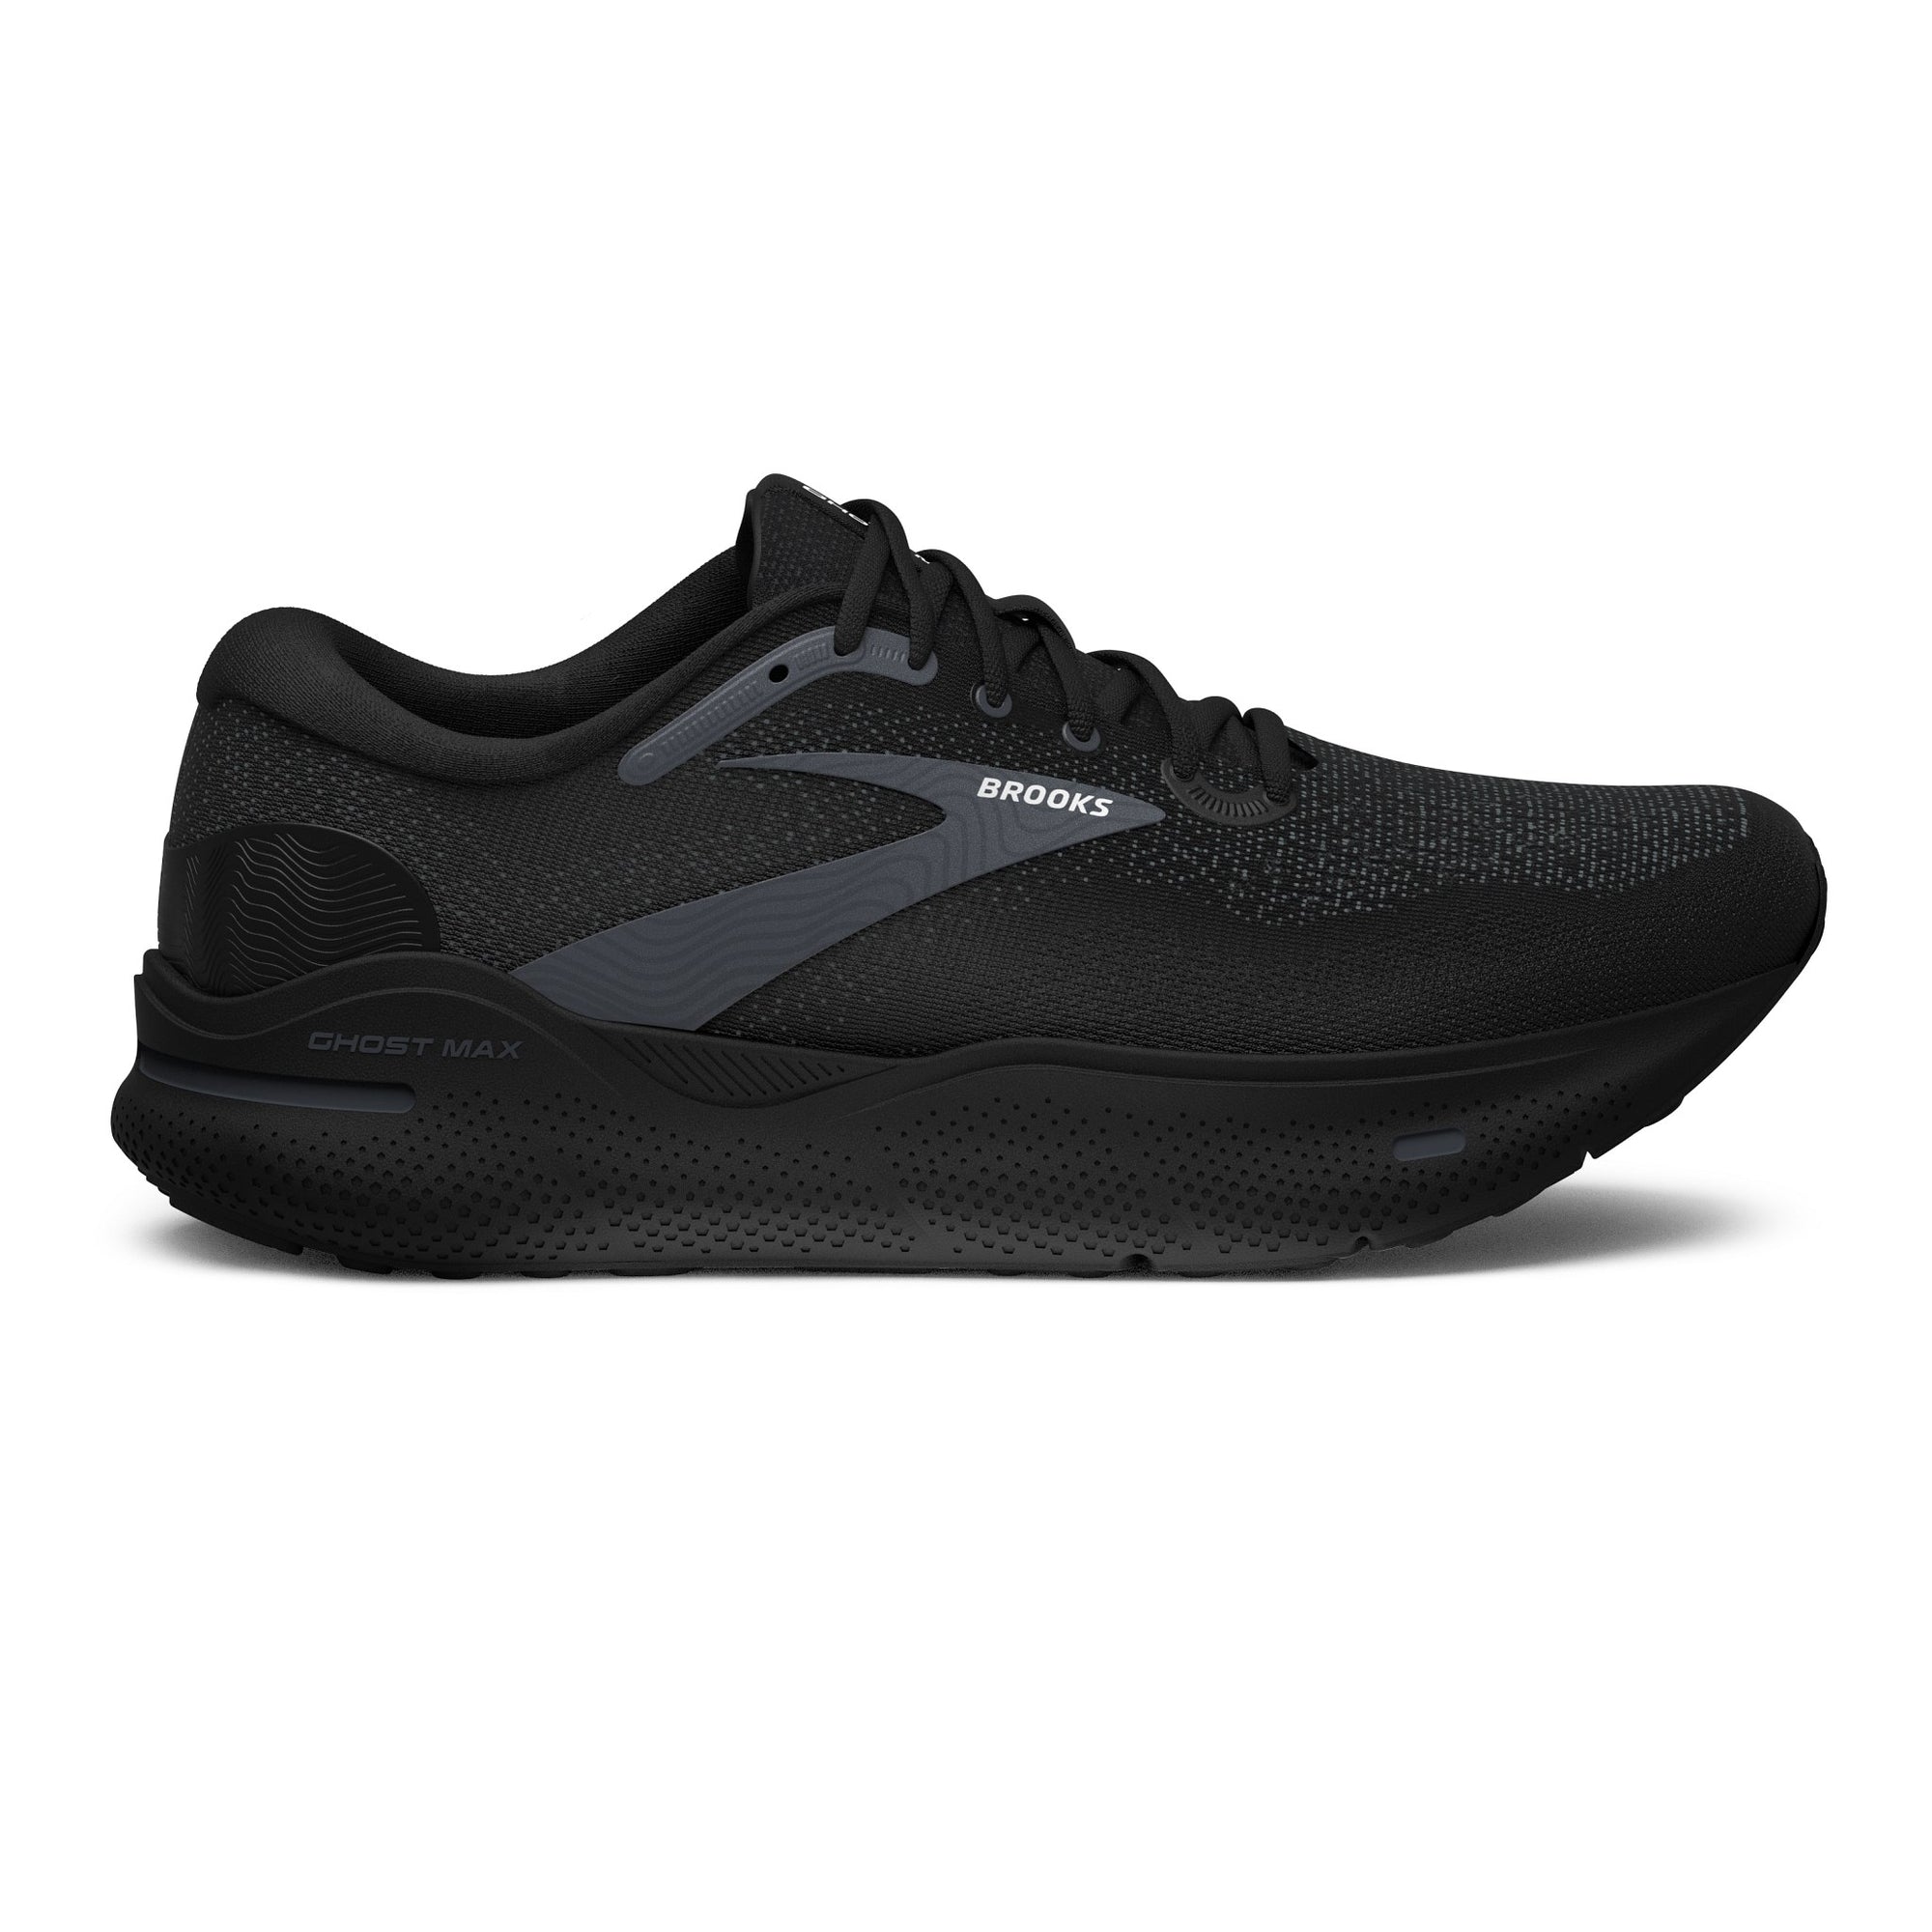 Brooks Ghost Max Black/Black/Ebony running shoe with a sleek design featuring DNA Loft v2 foam and an integrated logo on the side.